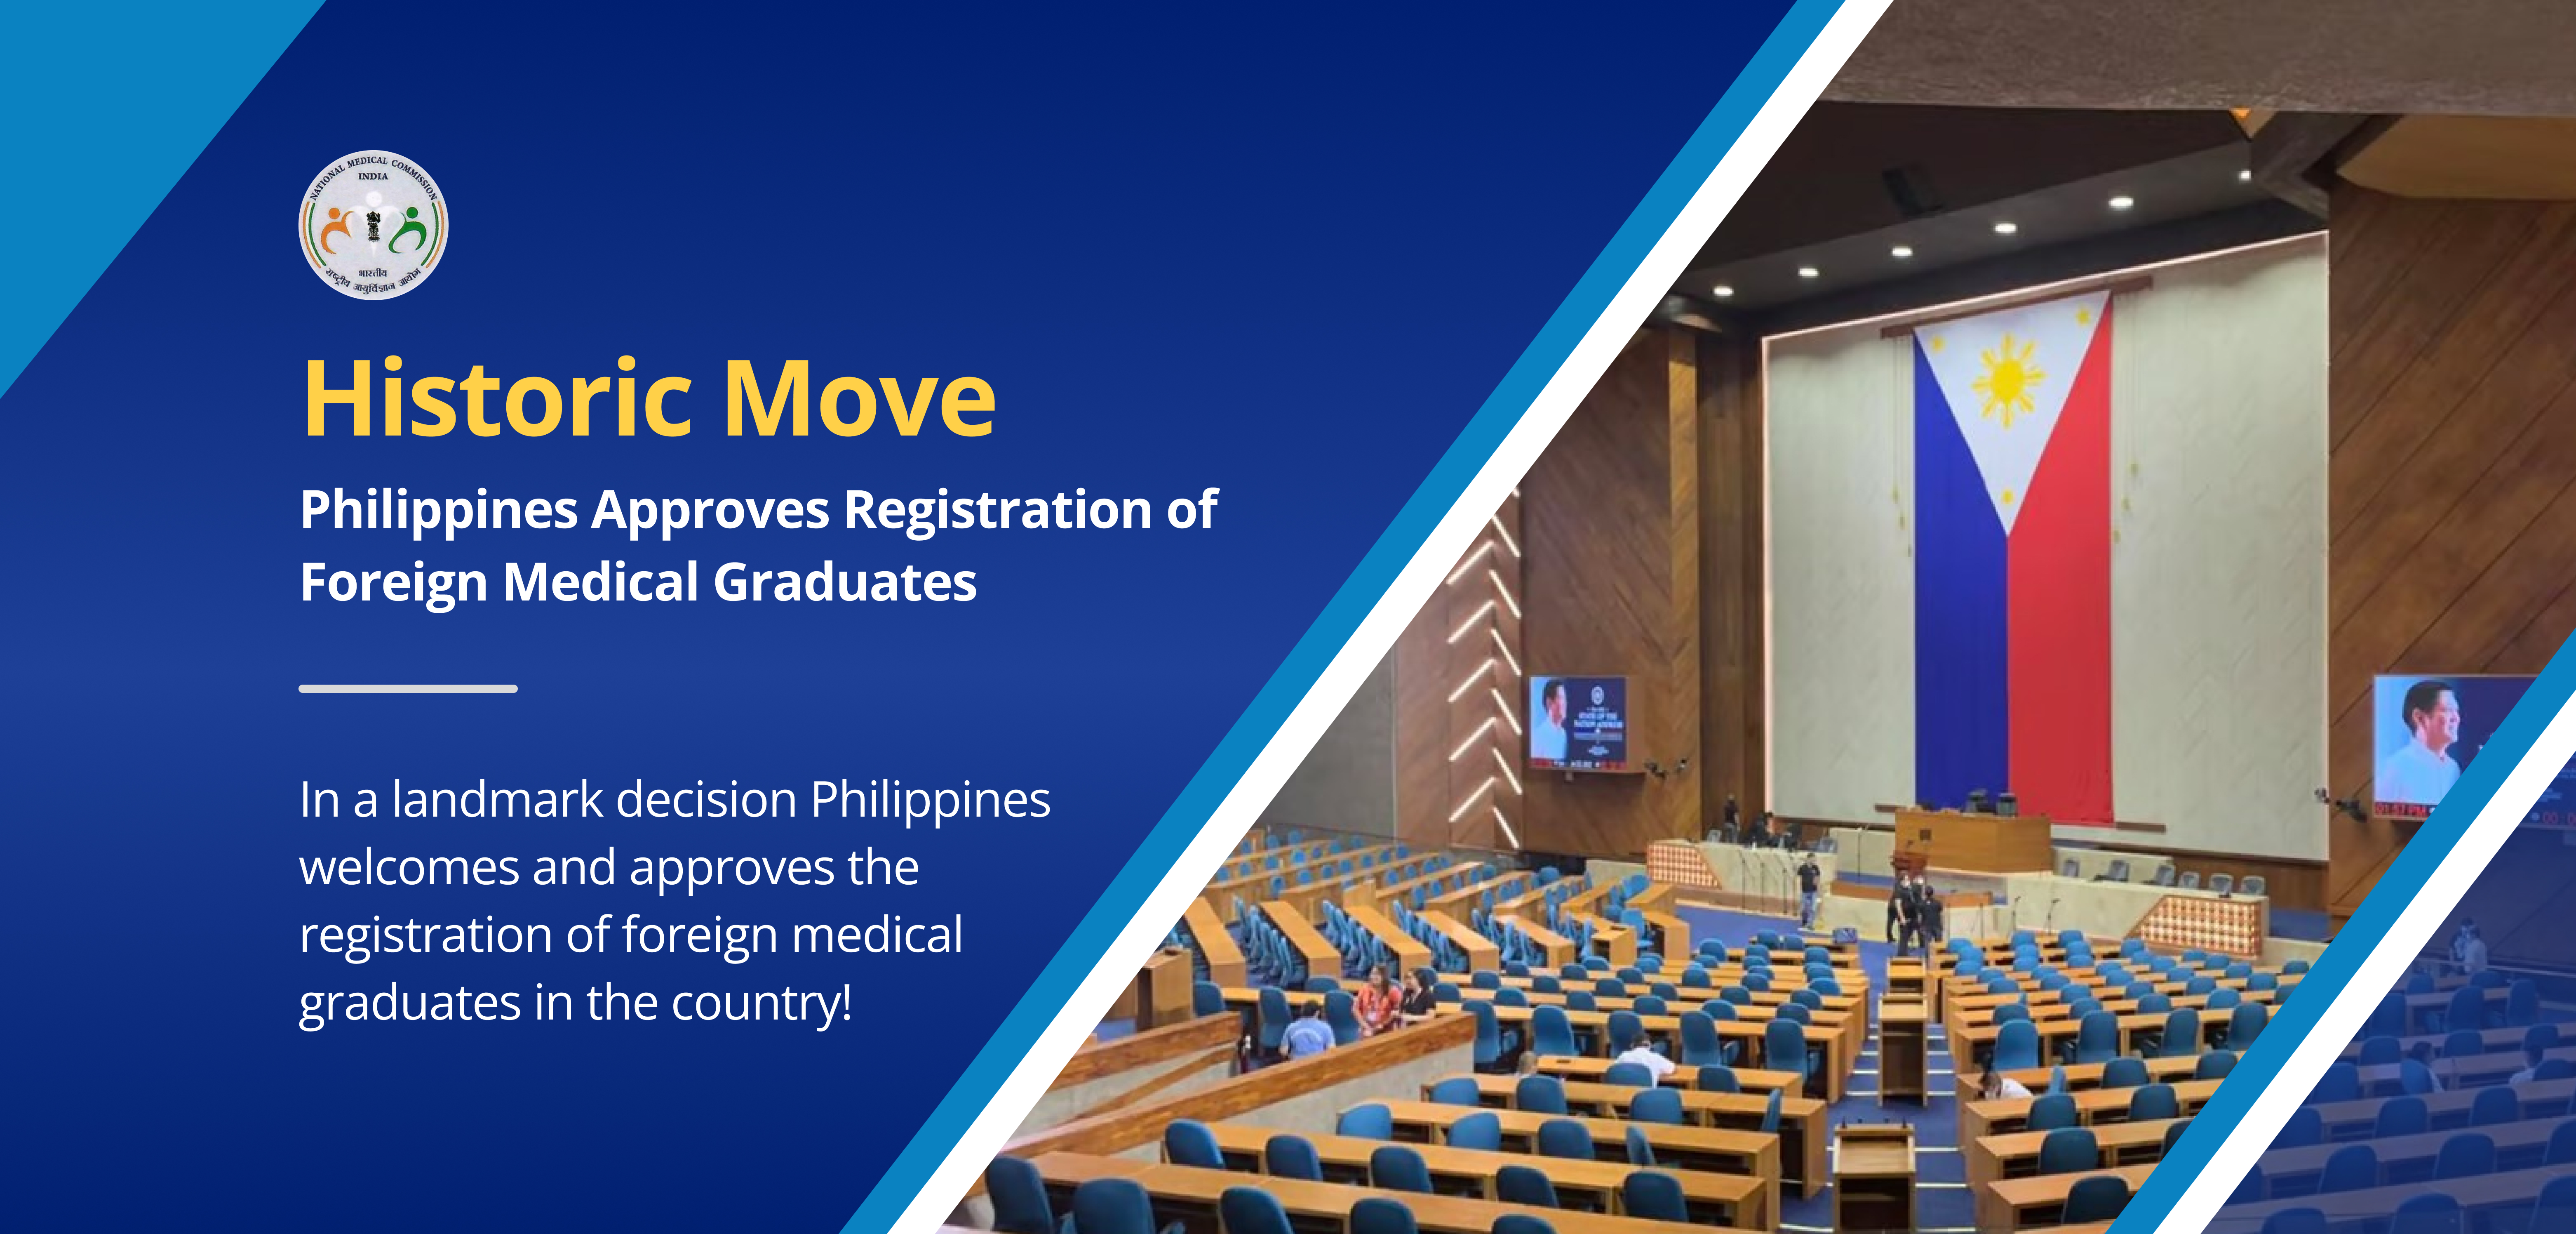 Philippines welcomes and approves the registration of foreign medical graduates in the country